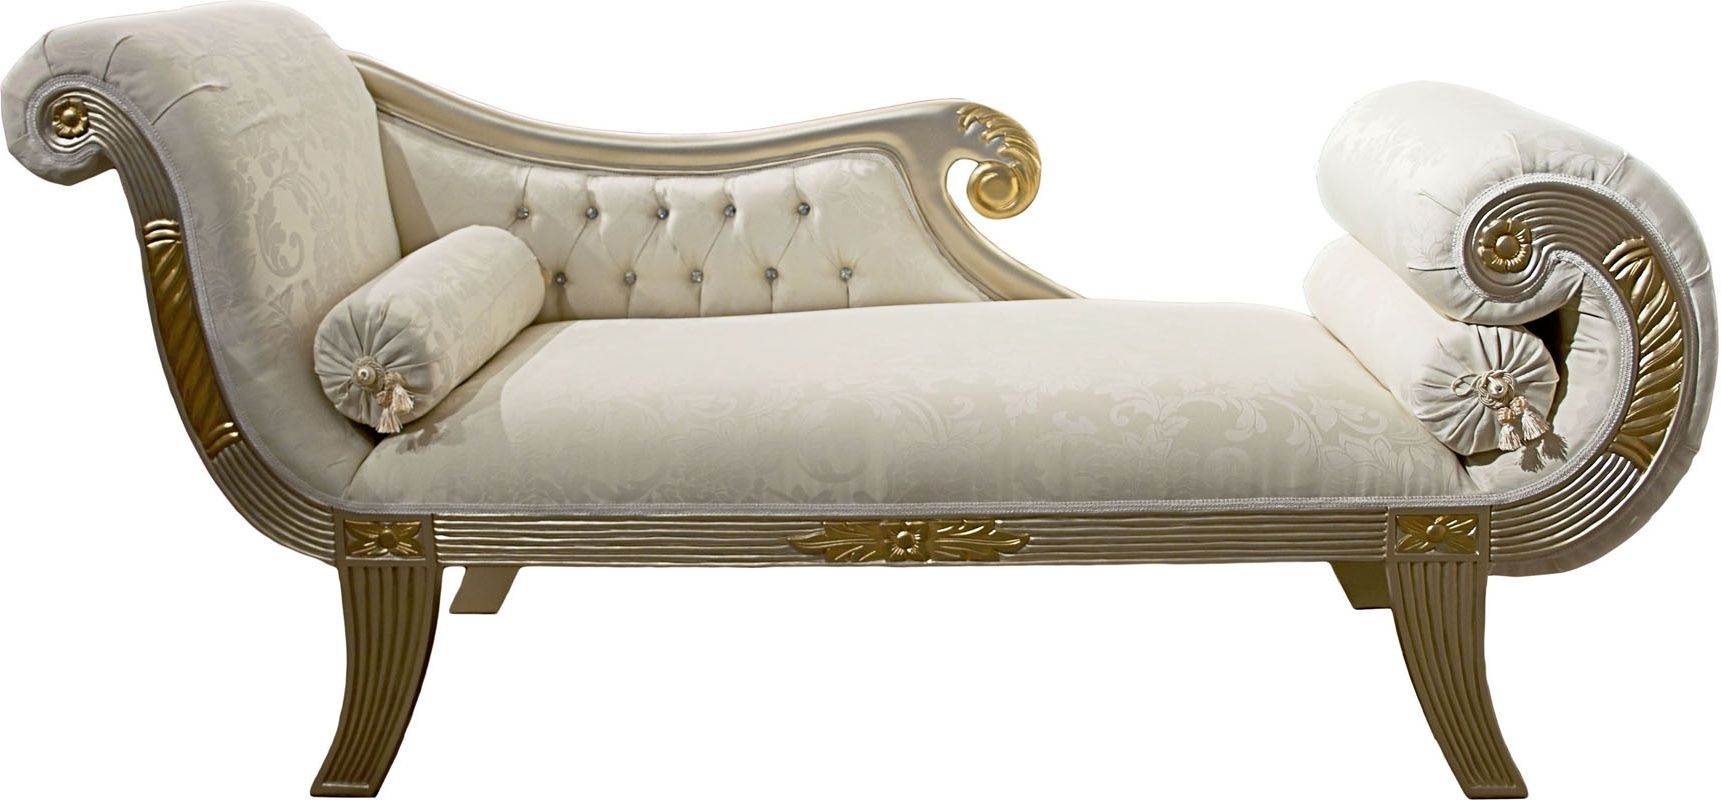 Latest Vintage Chaise Lounges Within White Leather Vintage Chaise Lounge Chair In Victorian Style Plus (View 5 of 15)